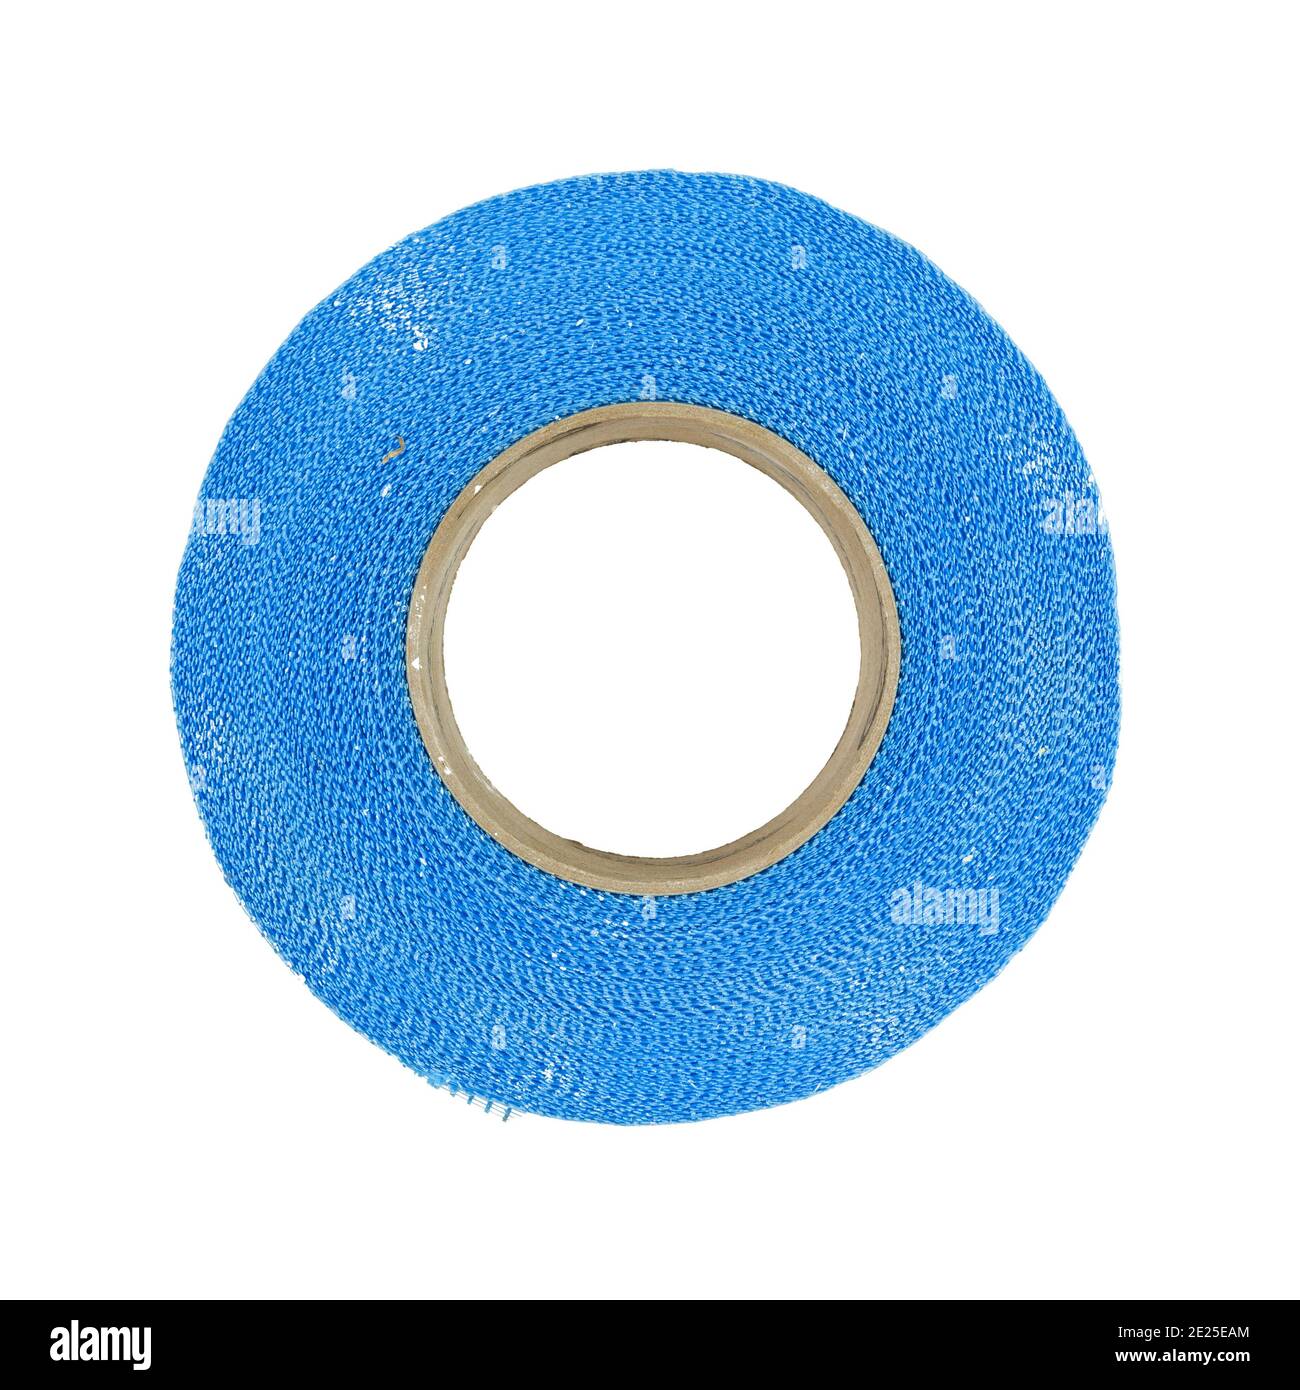 Top view of a roll of used blue mesh drywall tape isolated on a white background. Stock Photo